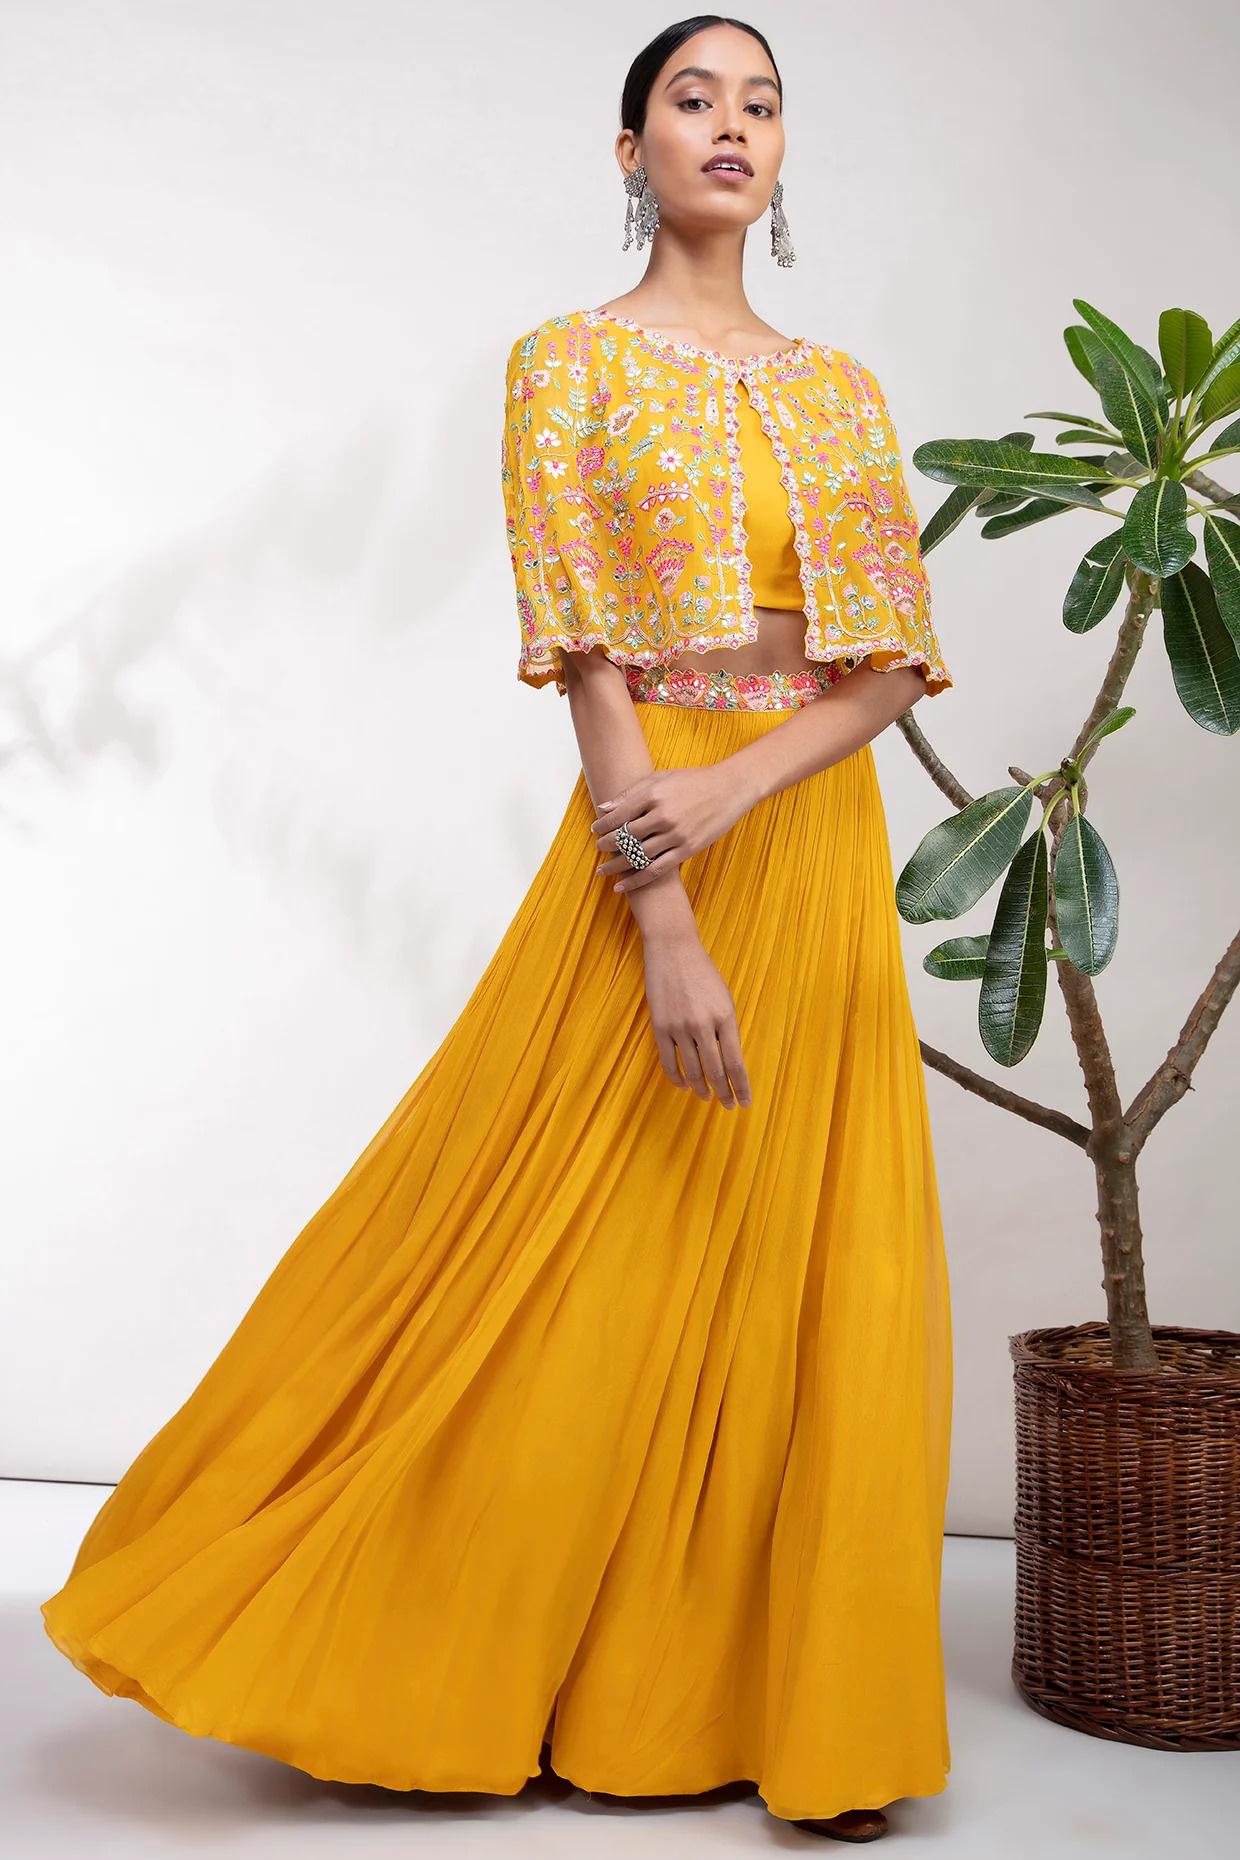 Latest 50 Haldi Dress For Bride And Bridesmaids (2022) - Tips and Beauty |  Haldi outfits, Mehendi outfits, Sharara designs